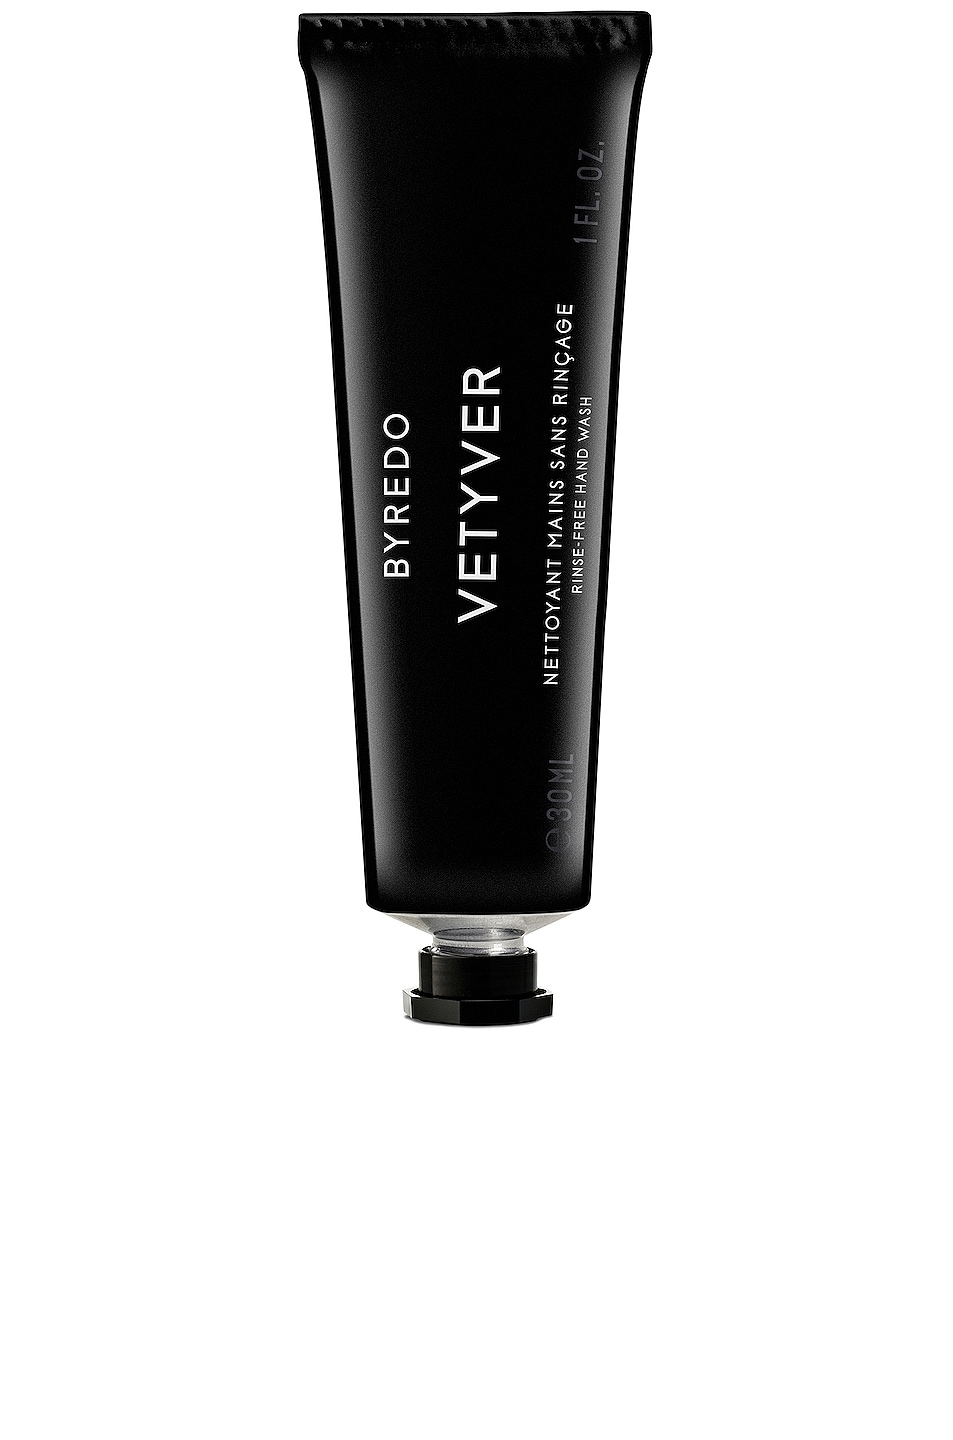 Vetyver Rinse-Free Hand Wash in Beauty: NA